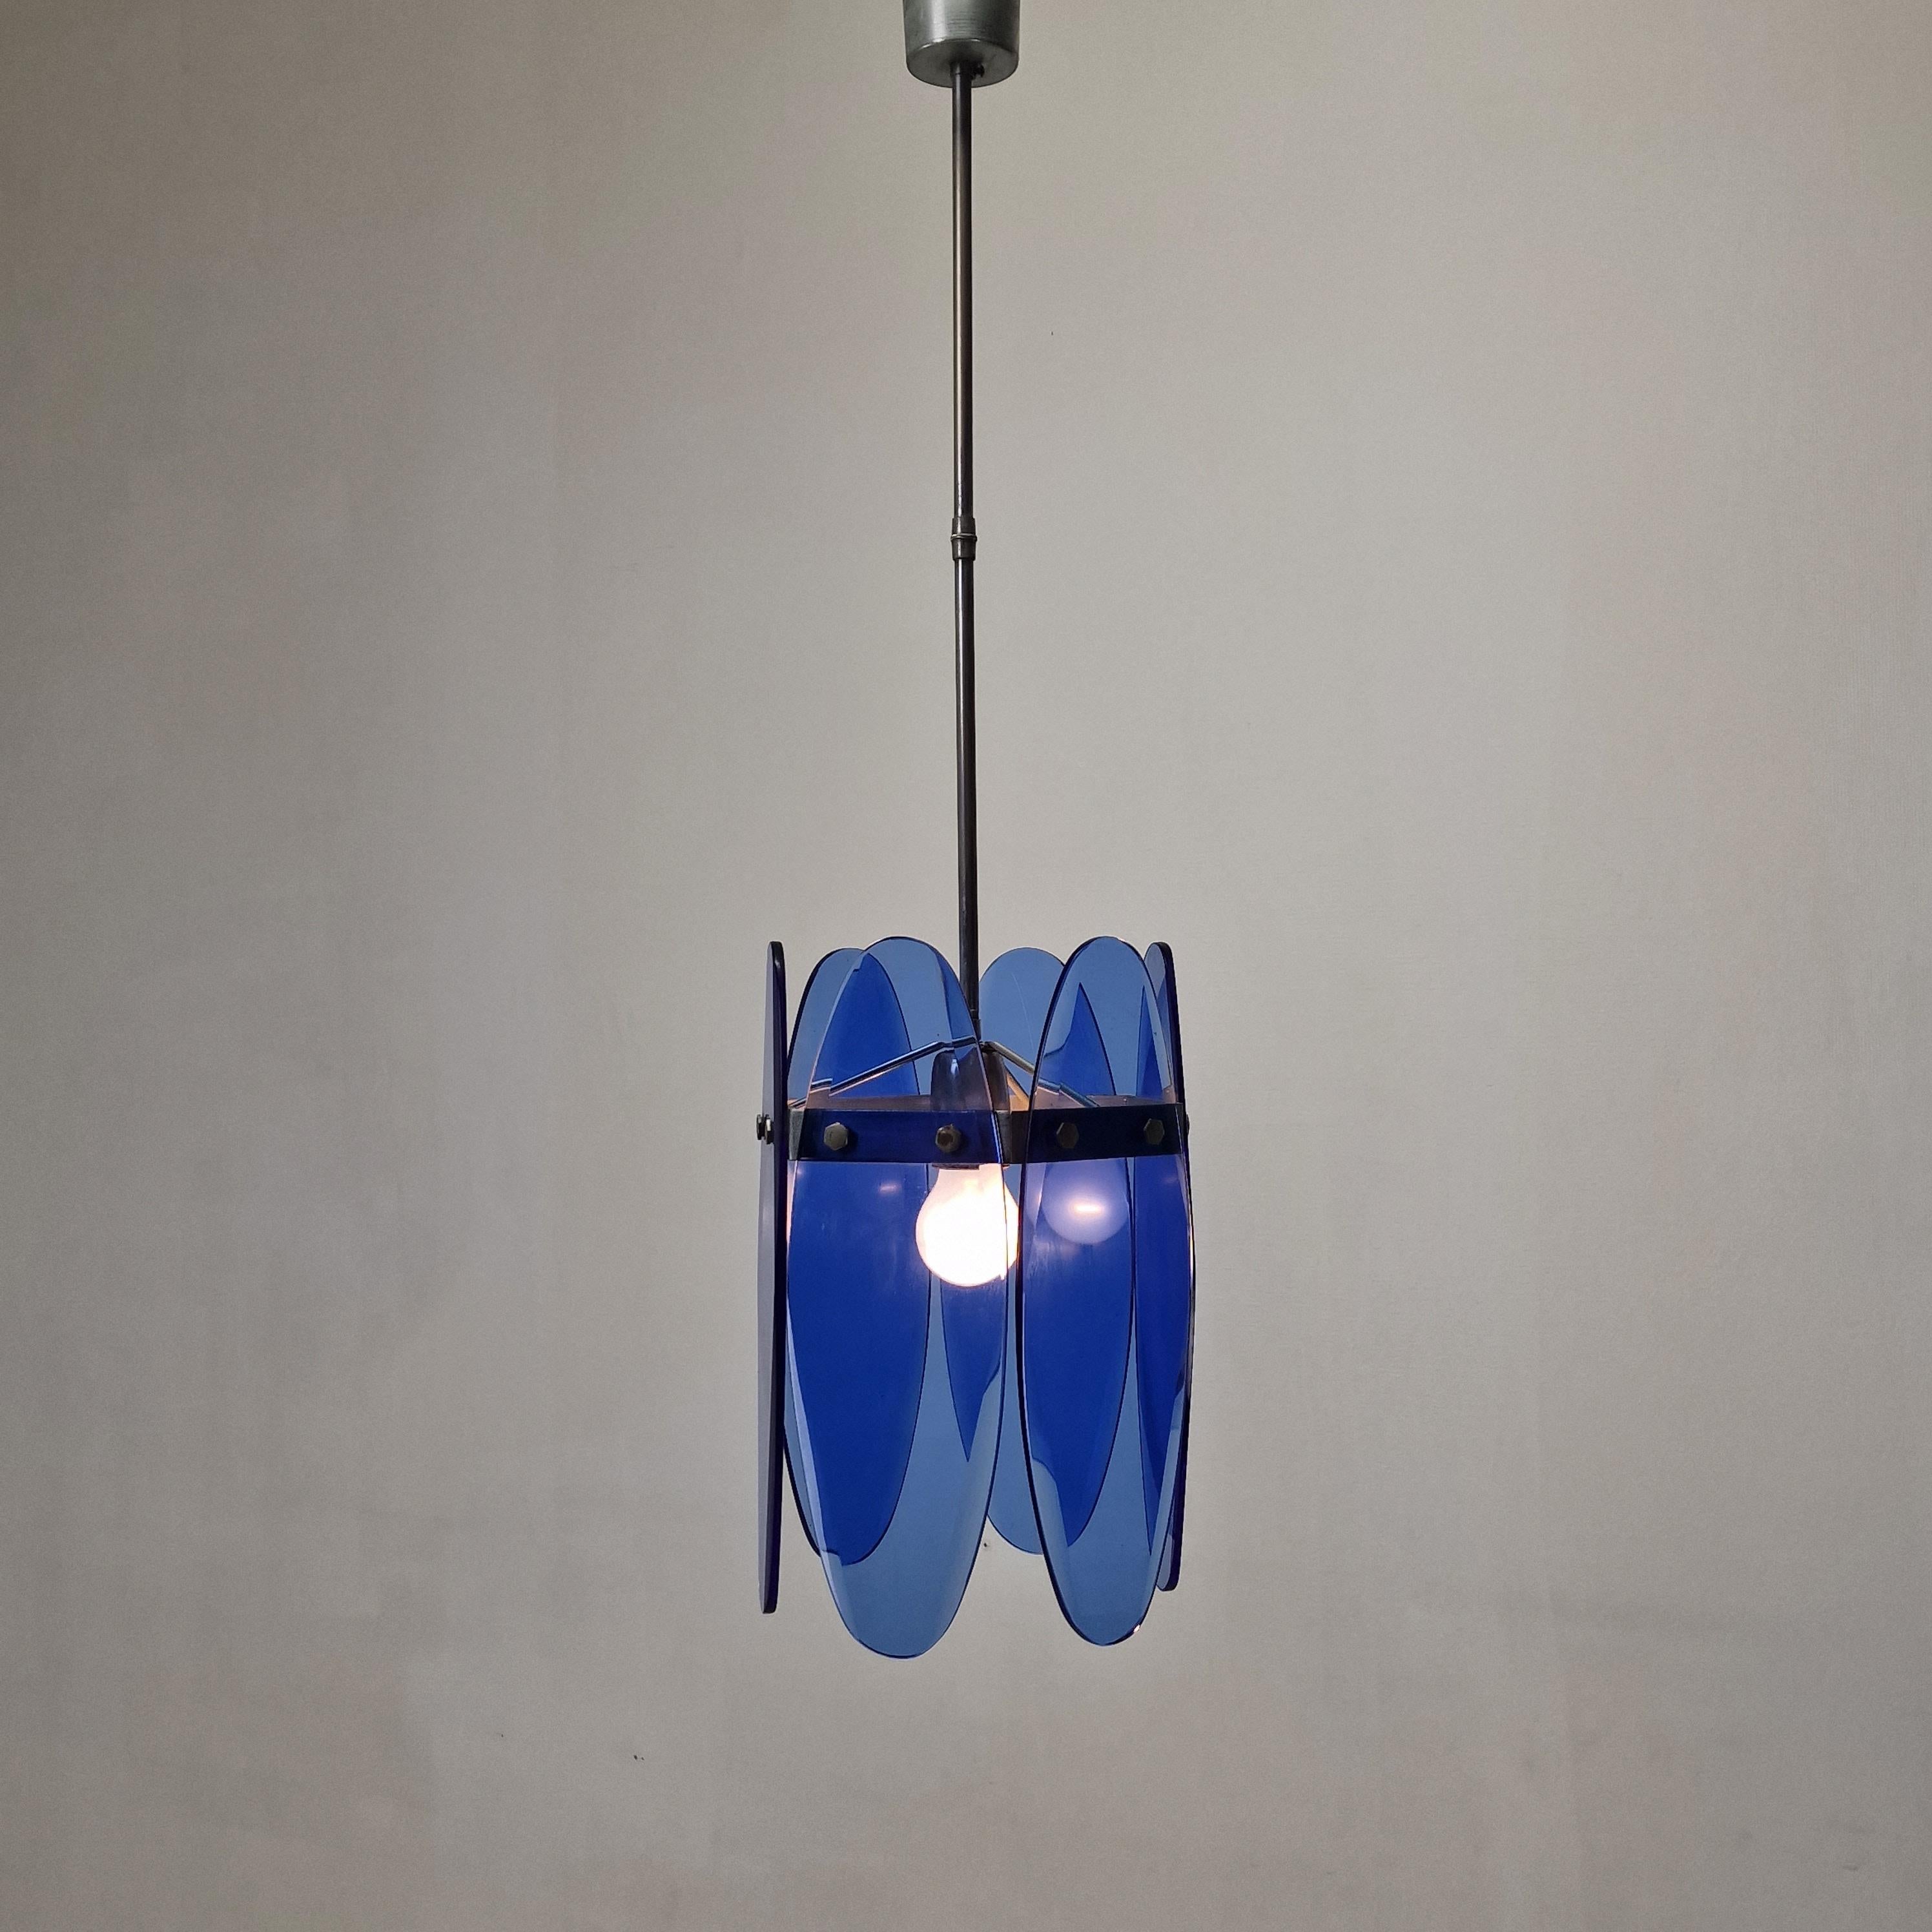 Exceptional glass pendant, fabricated by VECA Italy in the 70's.

Six beautiful facet cut glass panels in stunning blue.

The glass is in very good condition, no damages or cracks.

Size:
Diameter 21 cm (8.27